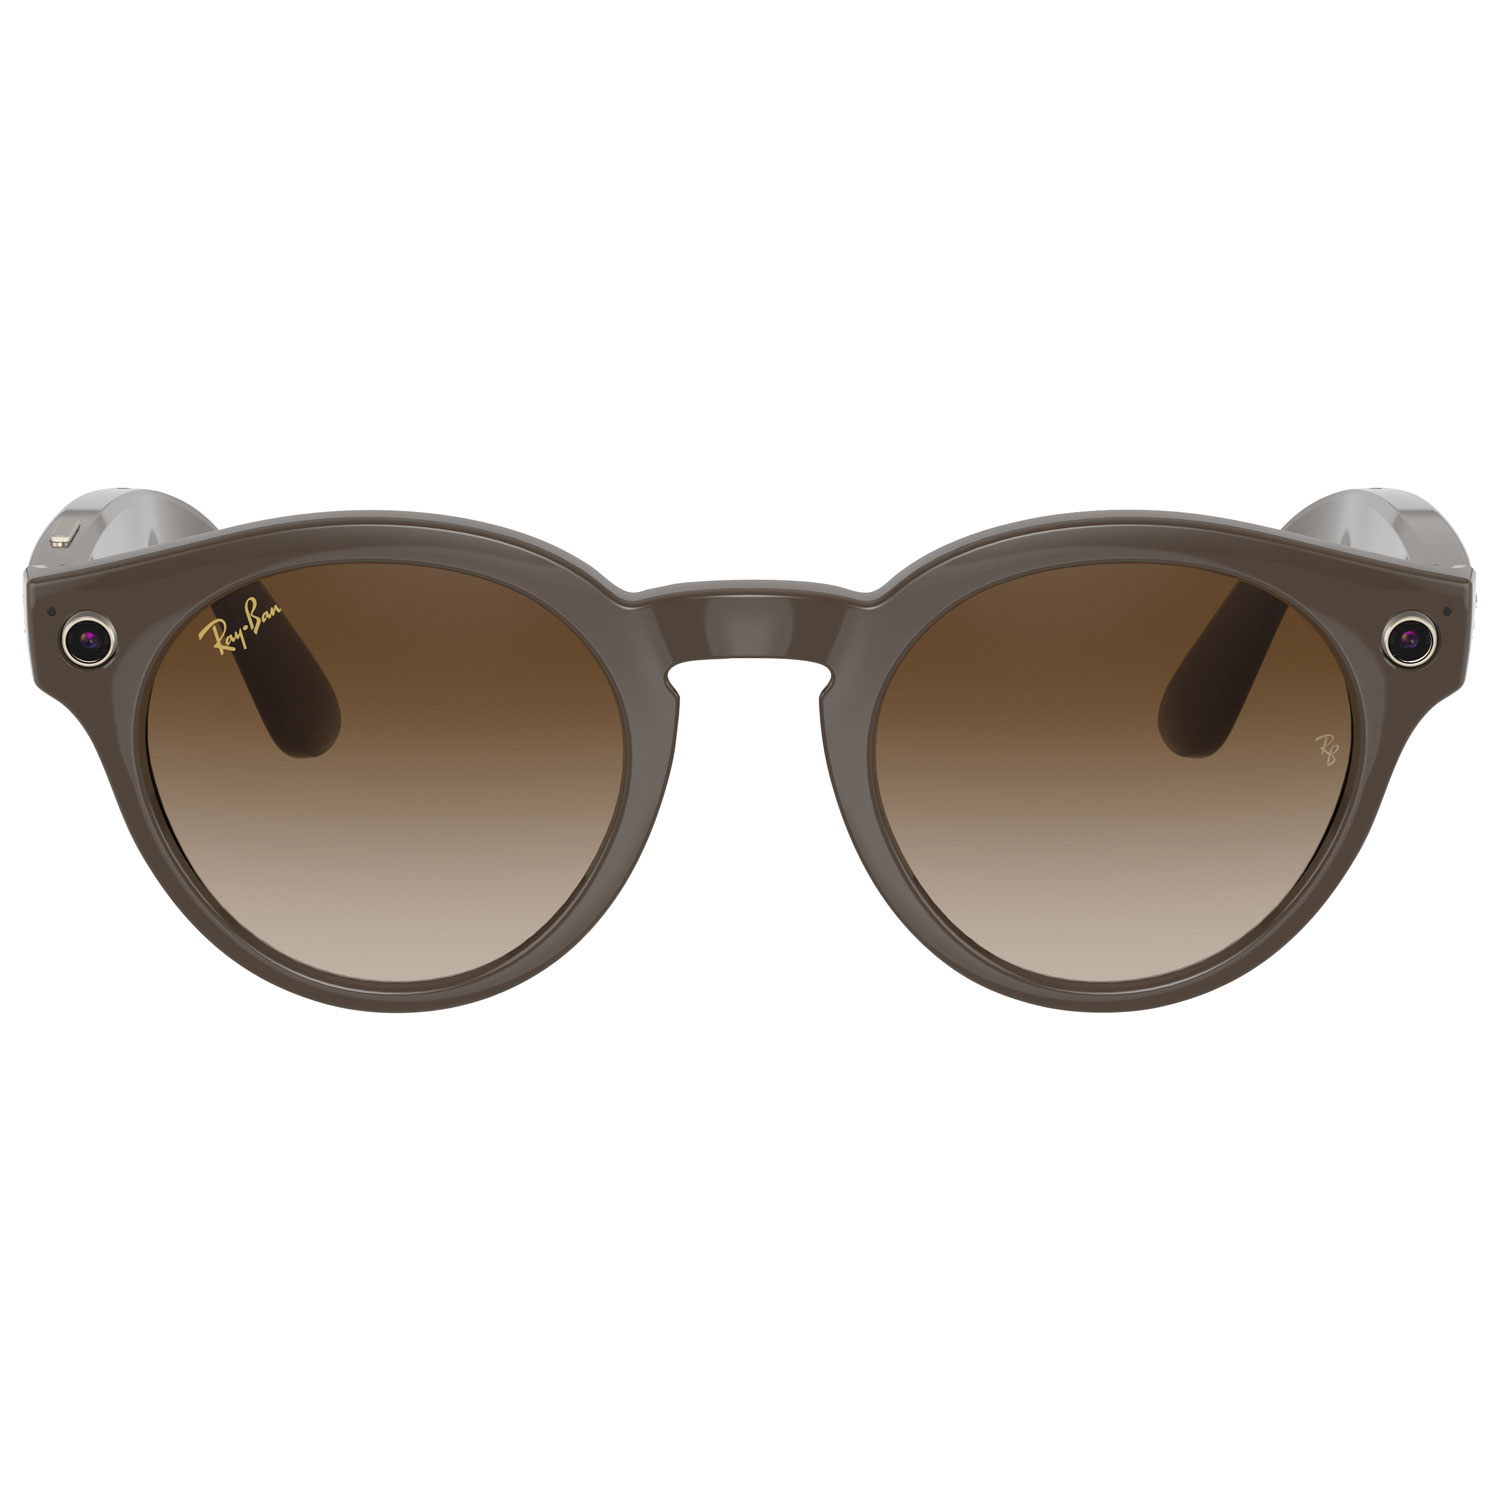 Ray-Ban Stories Round Smart Glasses with Photo, Video & Audio - Shiny Brown